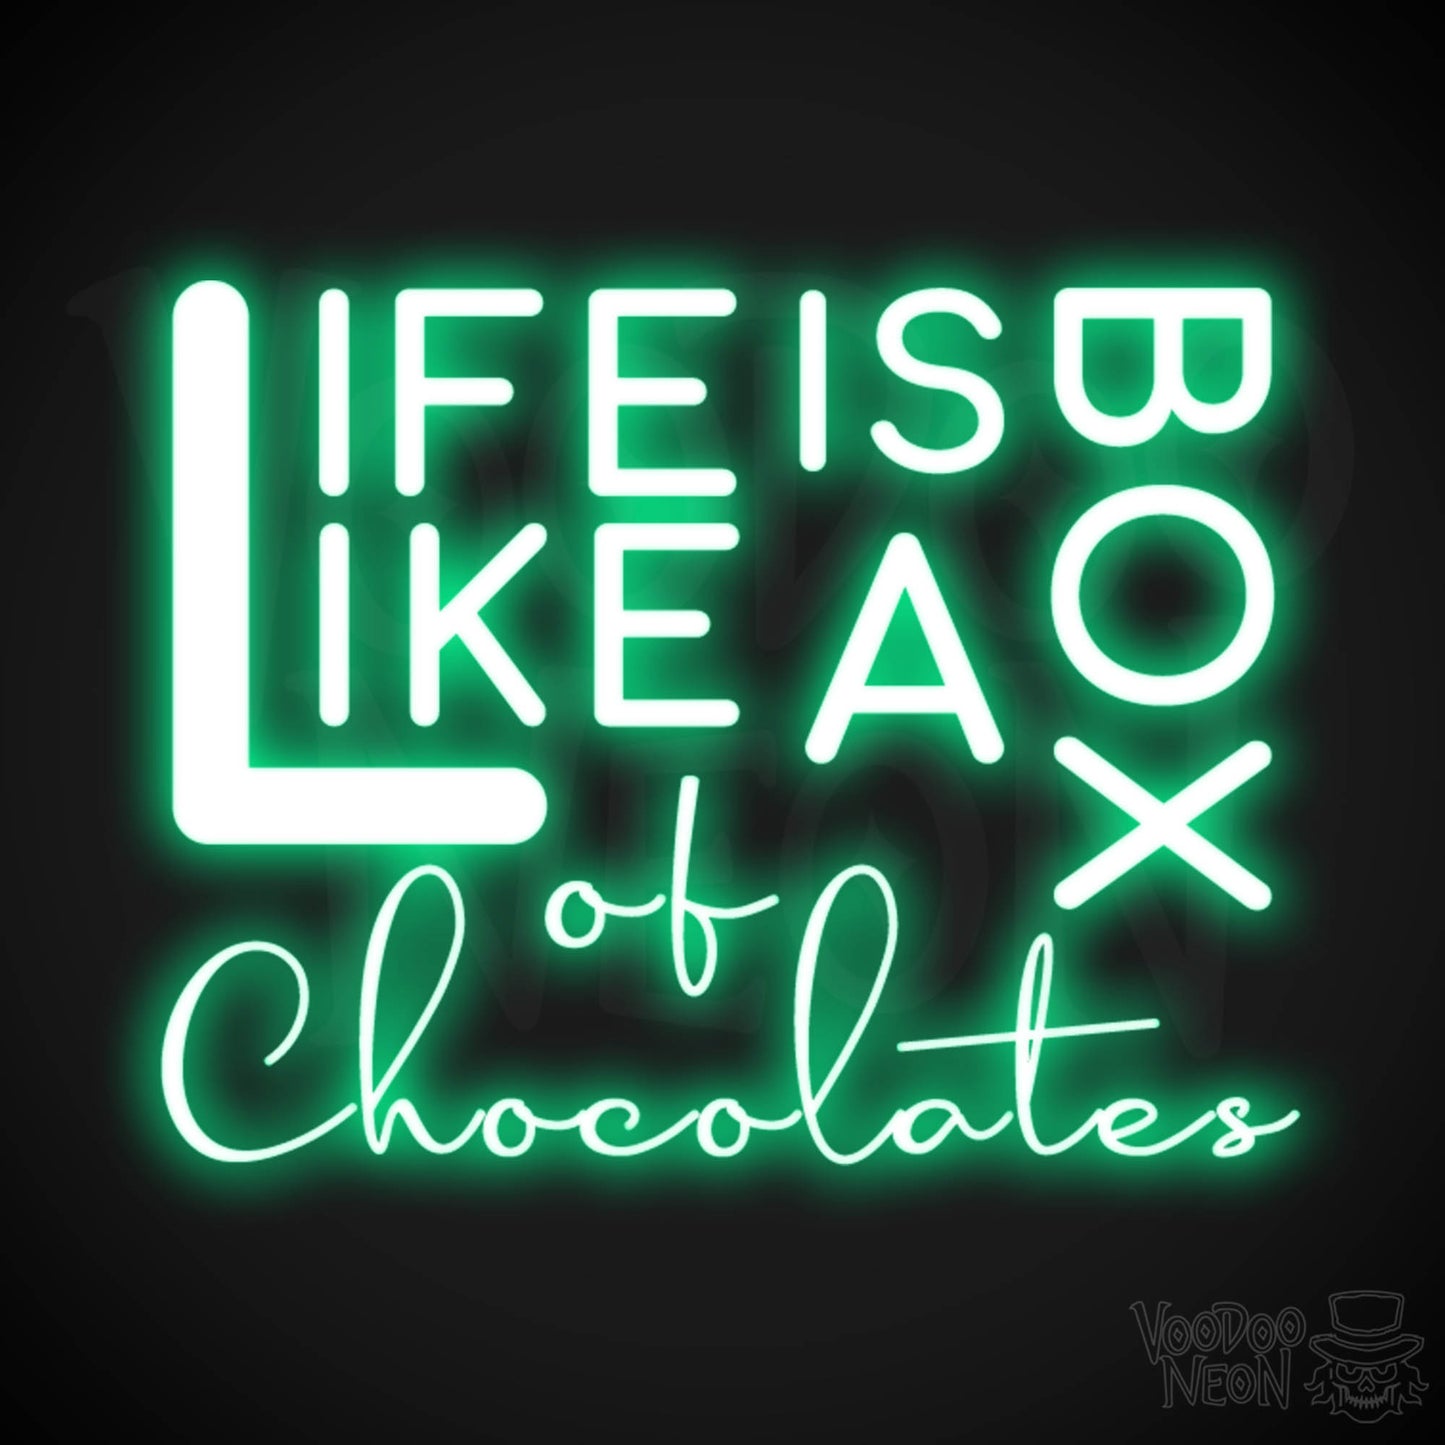 Life Is Like A Box Of Chocolates Neon Sign - Neon Life Is Like A Box Of Chocolates Sign - LED Wall Art - Color Green